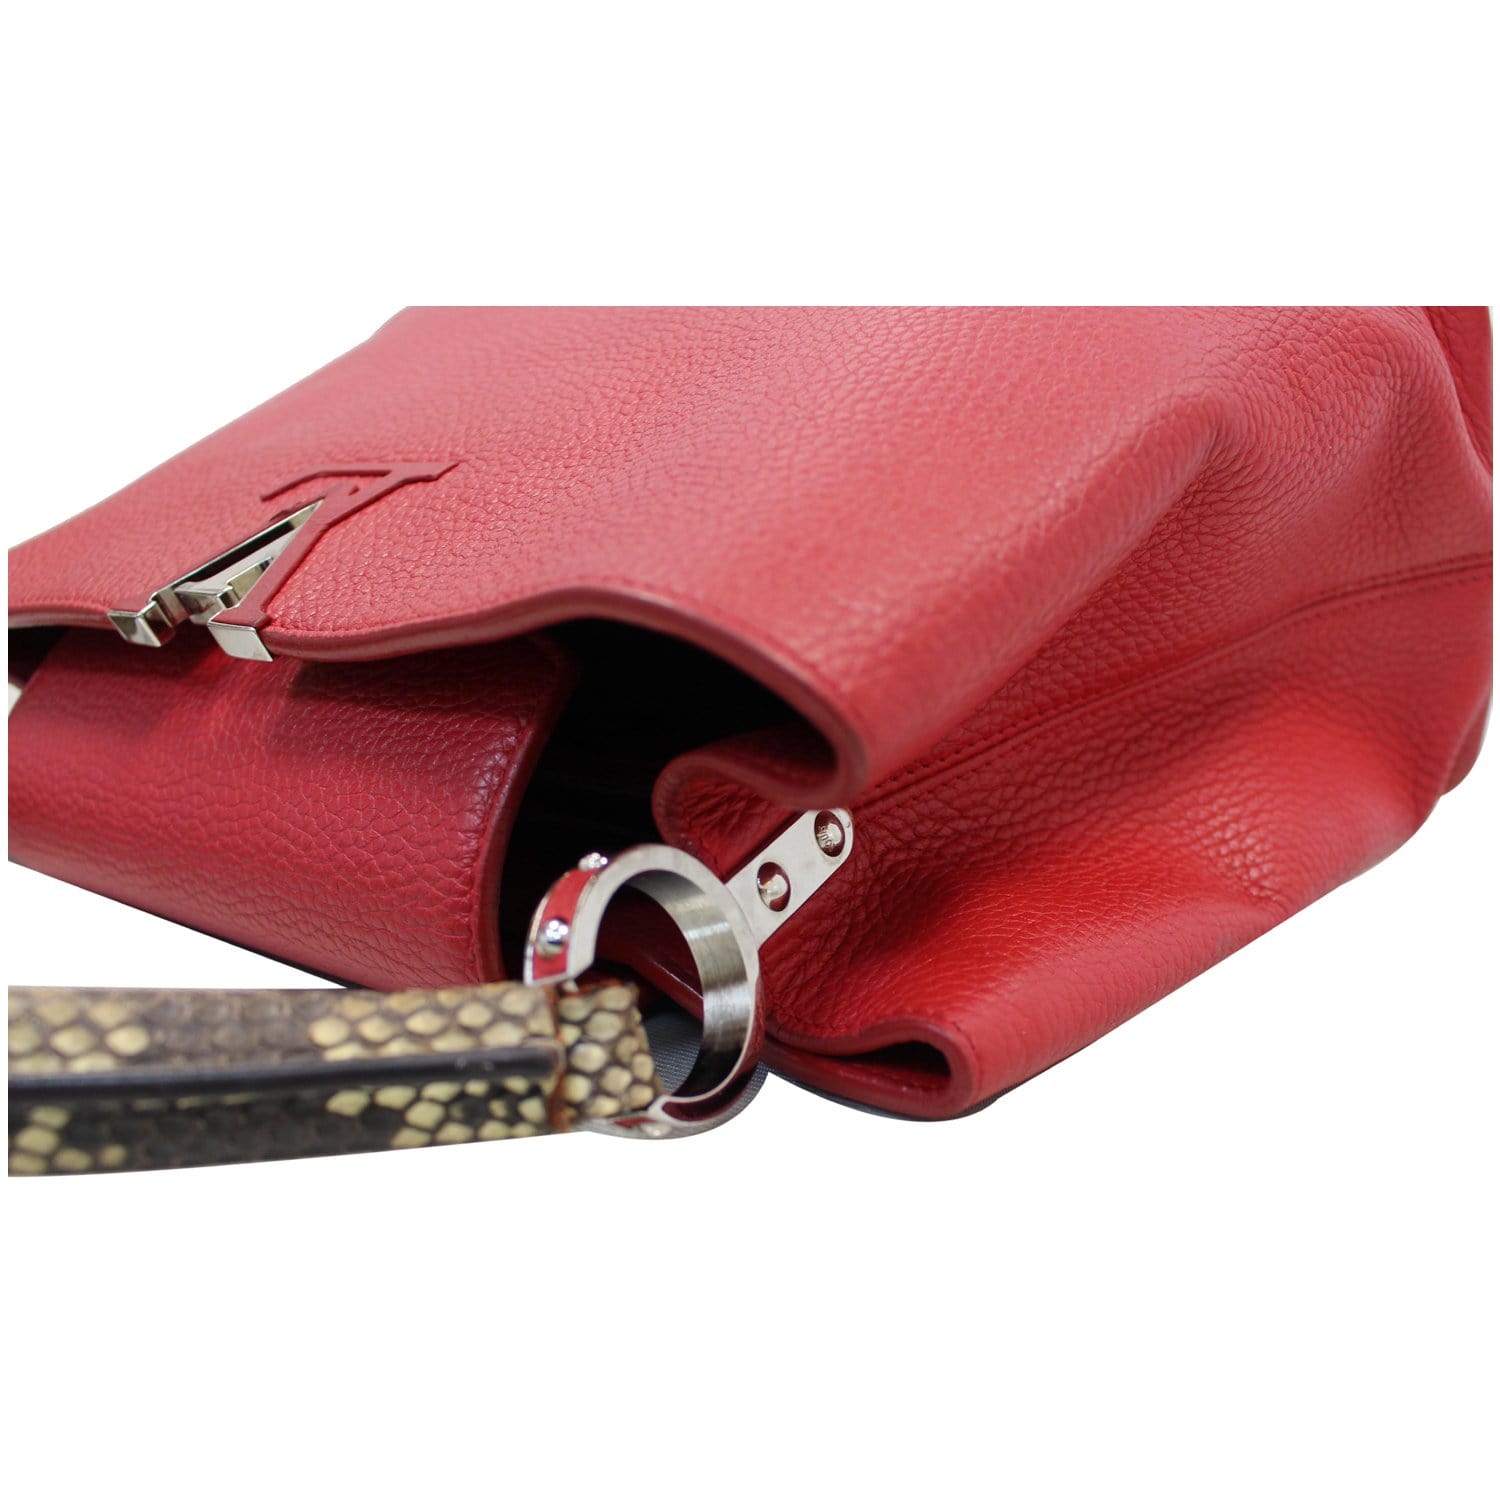 Louis Vuitton Capucines Mm Python Red Taurillon Leather N91899